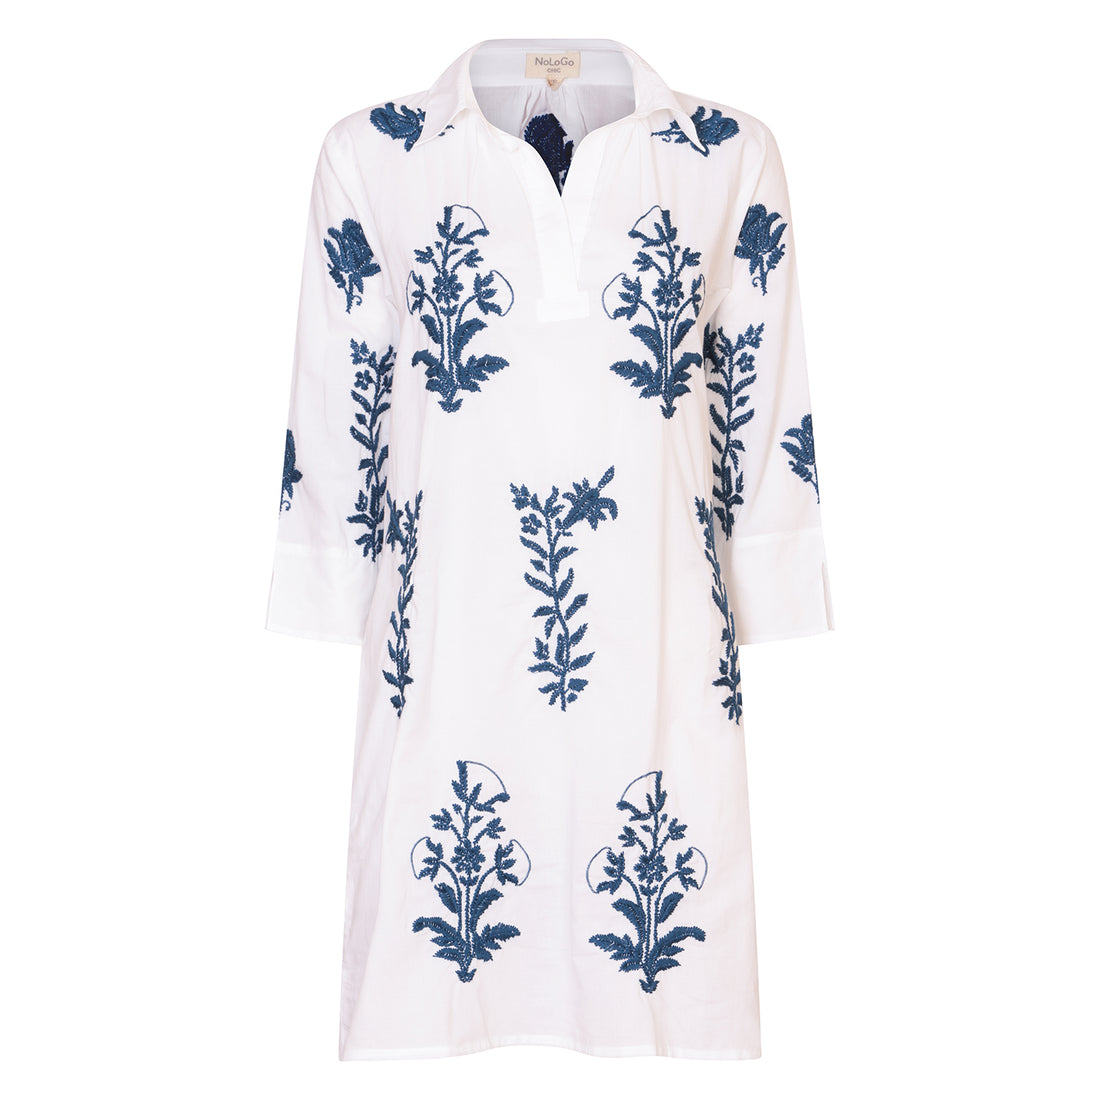 Short Tourist Dress White with Blue Embroidery Cotton White